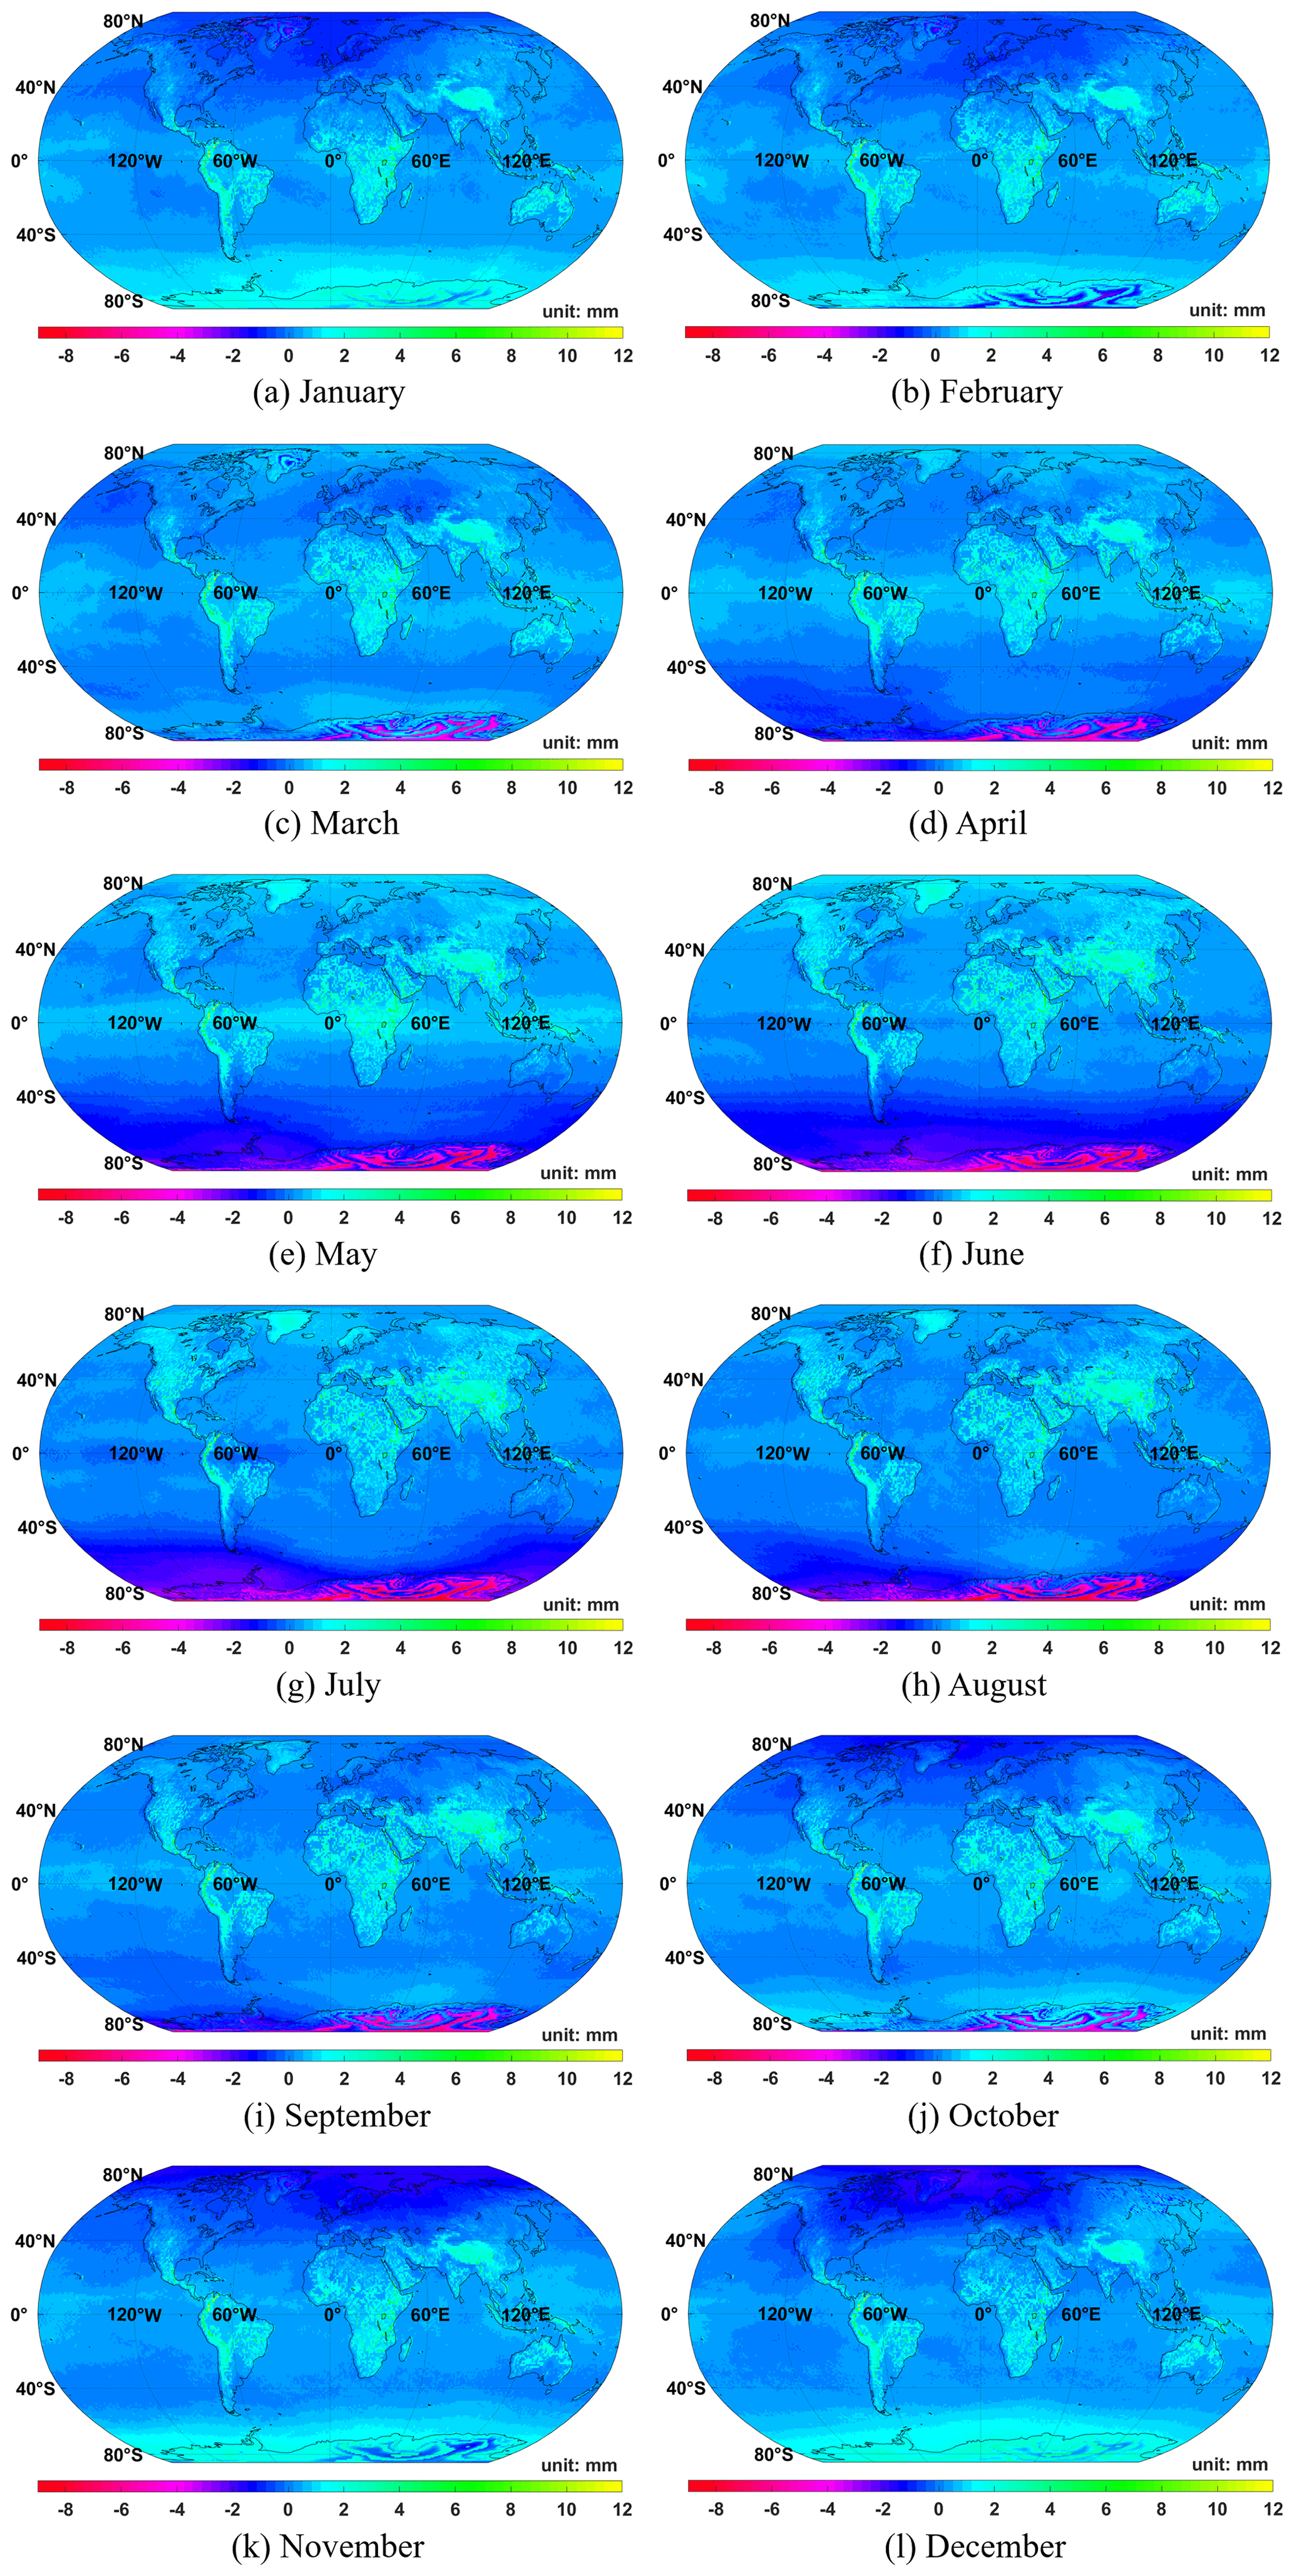 GMD - Analysis of systematic biases in tropospheric hydrostatic delay  models and construction of a correction model